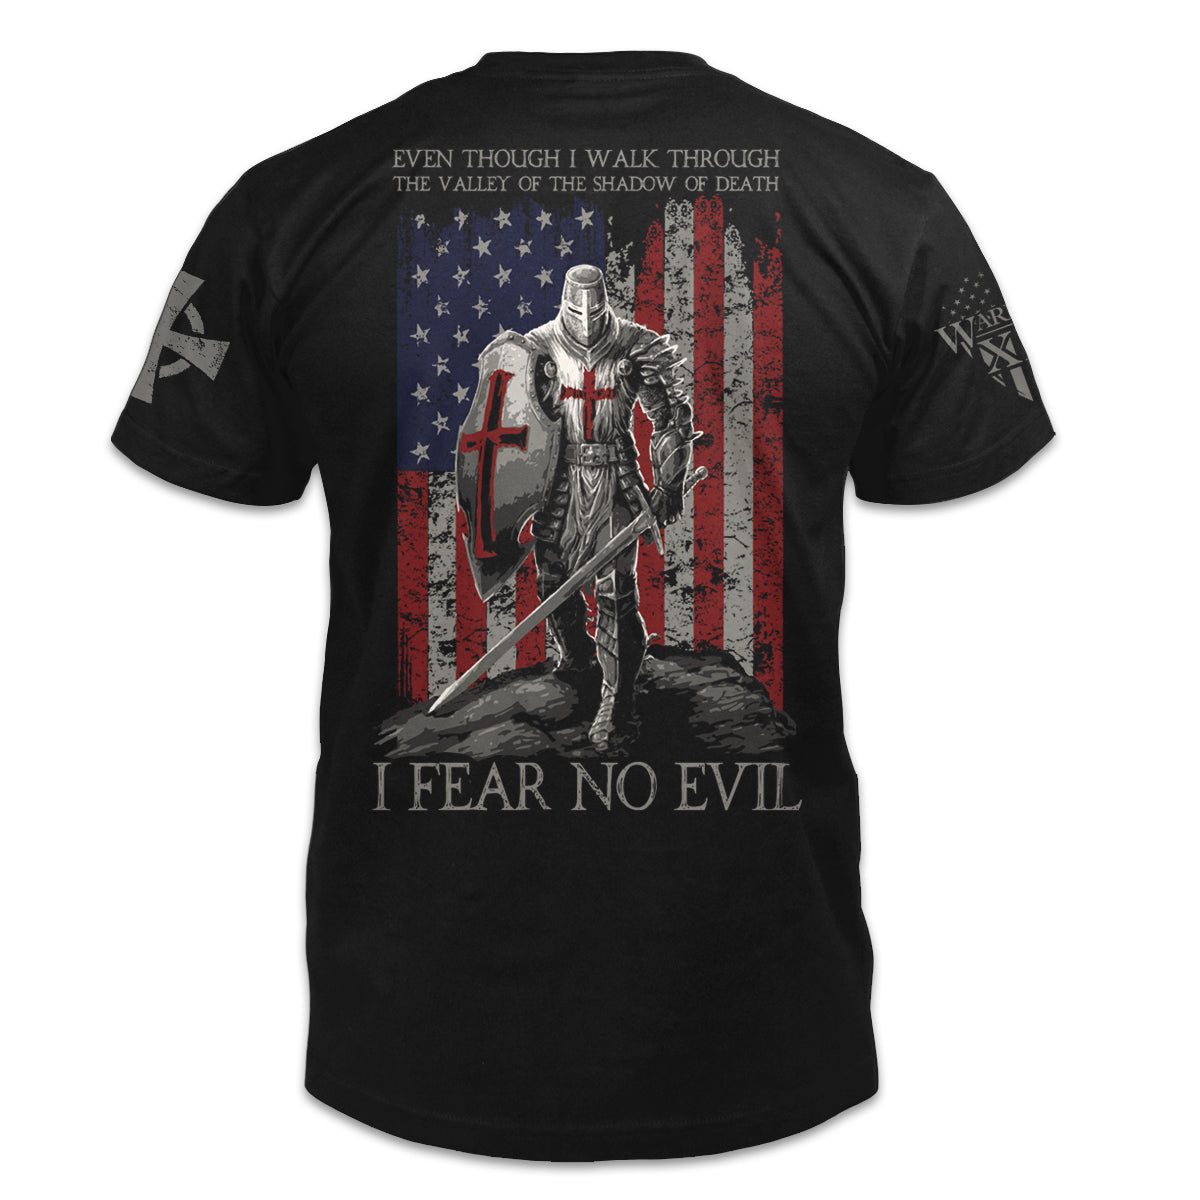 A black t-shirt with the words "Even Though I Walk Through The Valley Of The Shadow Of Death, I FEAR NO EVIL -Psalm 23:4" with a crusader printed on the back of the  shirt.